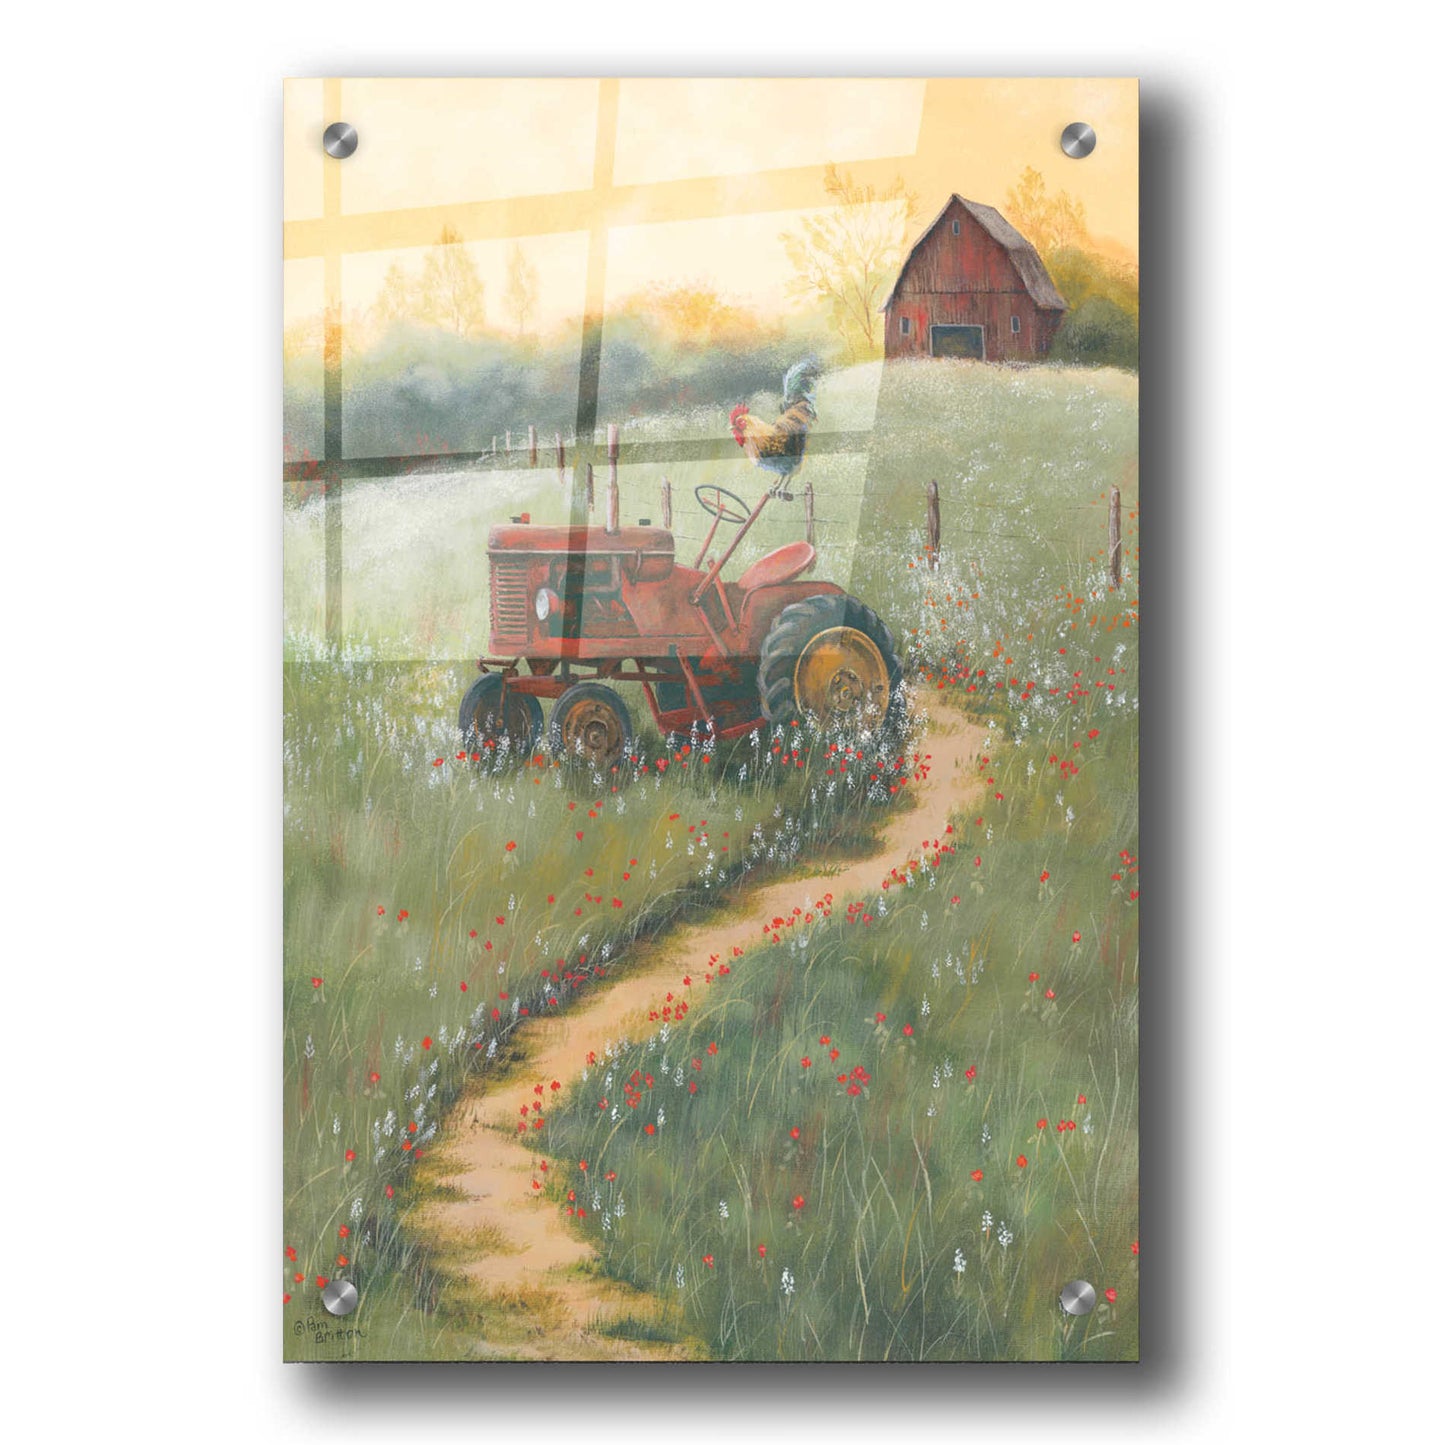 Epic Art 'The Old Tractor' by Pam Britton, Acrylic Glass Wall Art,24x36